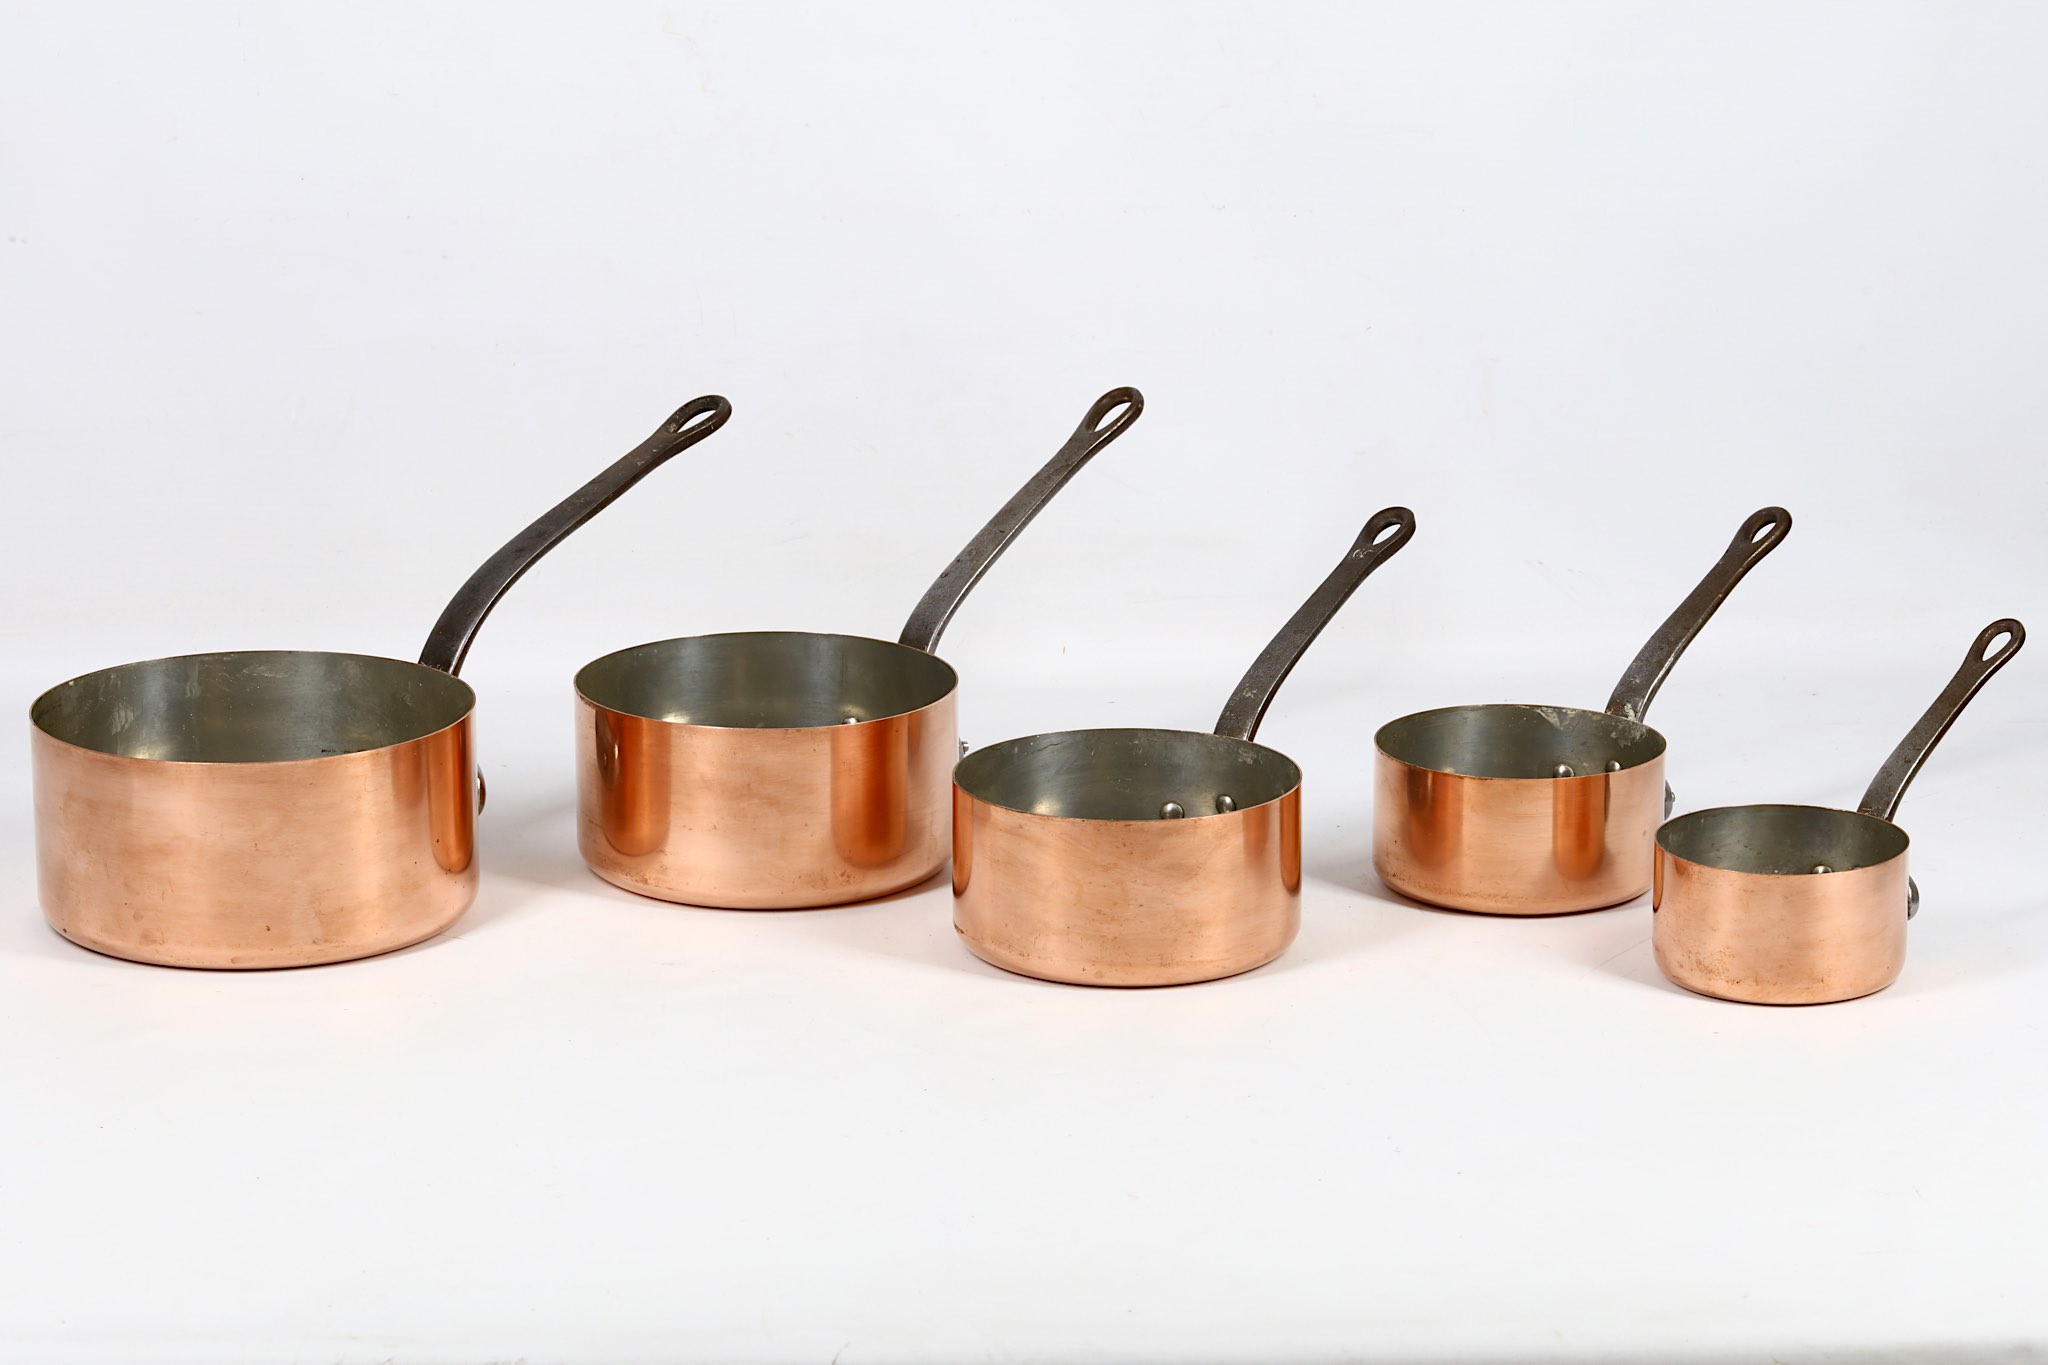 A set of 5 graduated copper saucepans with steel handles and tinned interiors (5).